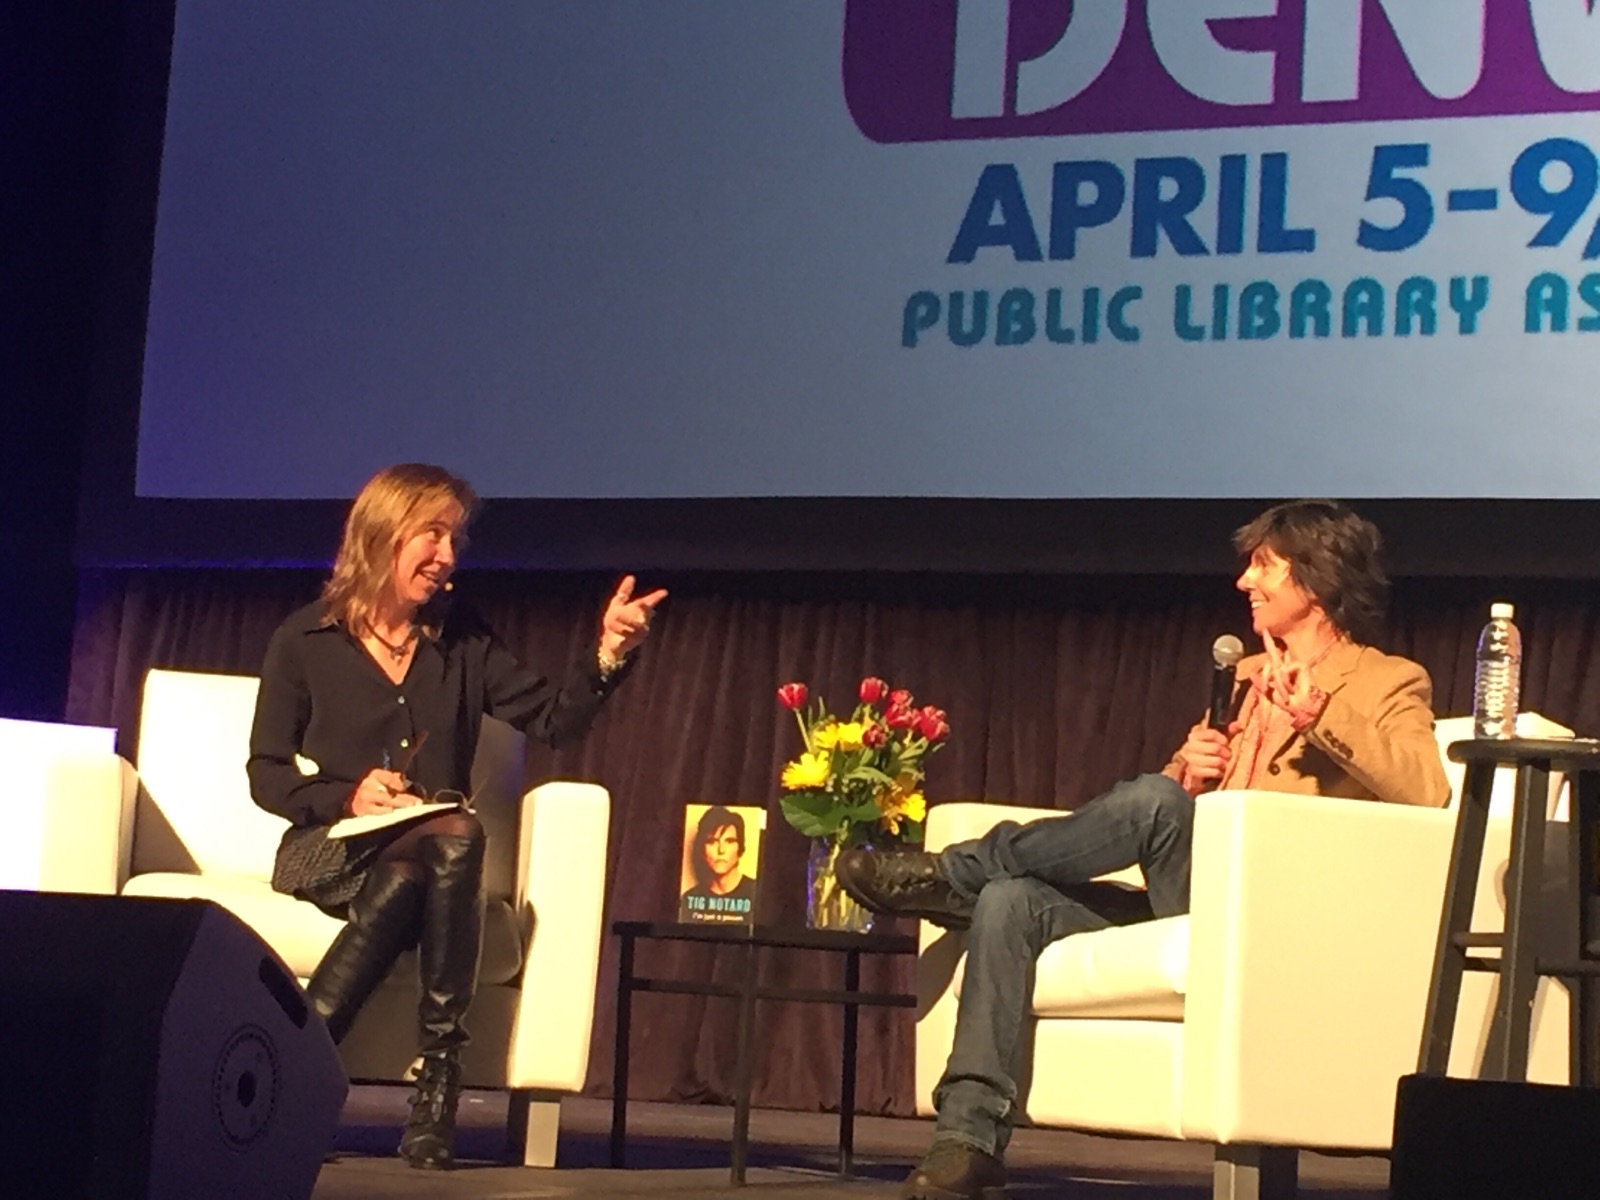 Vailey Oehlke, PLA President (left) and Tig Notaro at PLA 2016 in Denver.